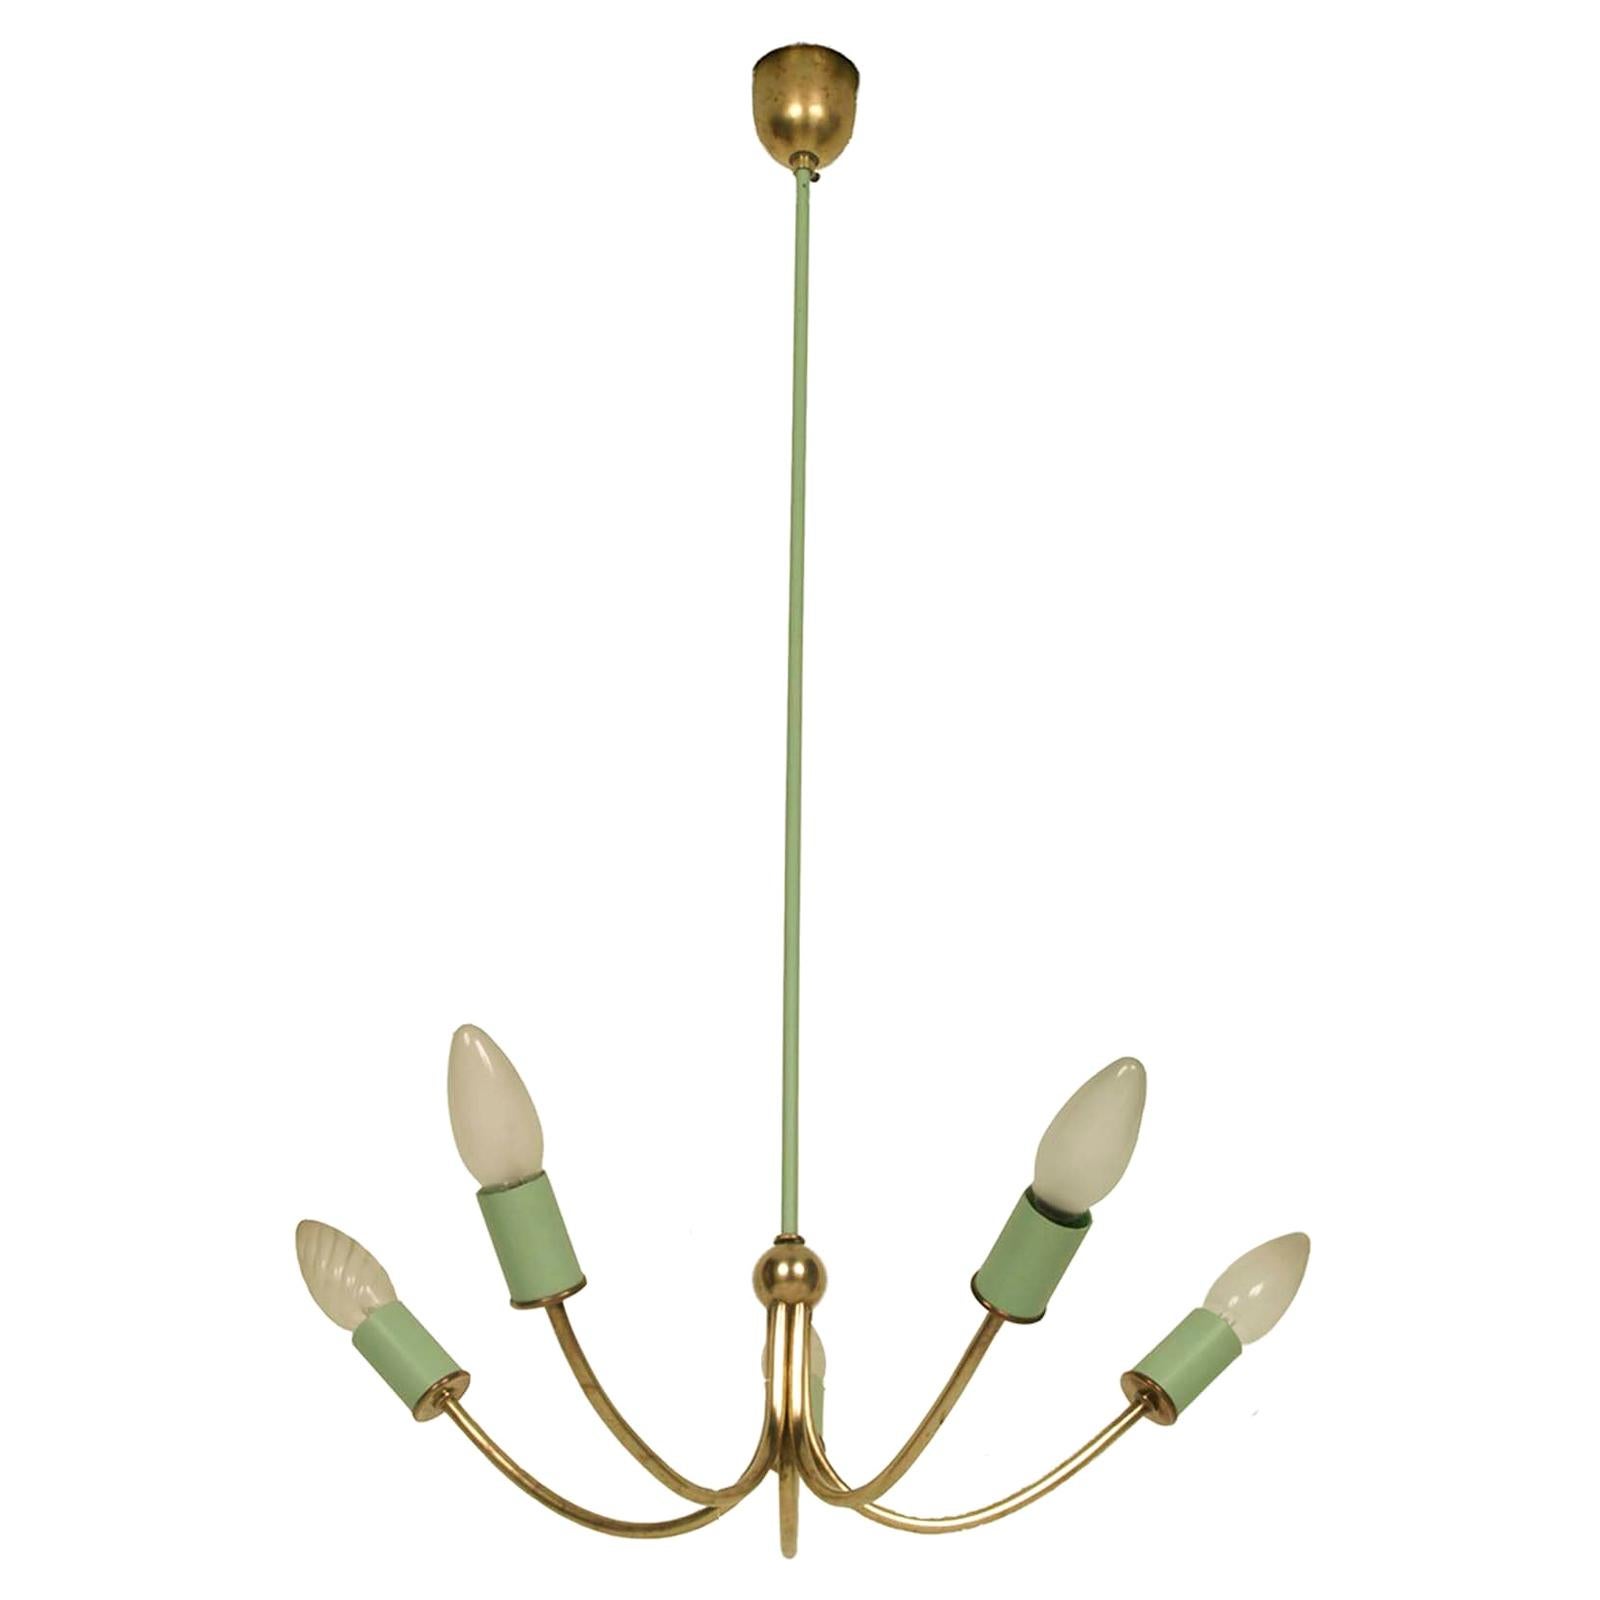 Italy 1920s Chandelier Art Deco, Gilt Brass and Painted Brass with Five Lights For Sale